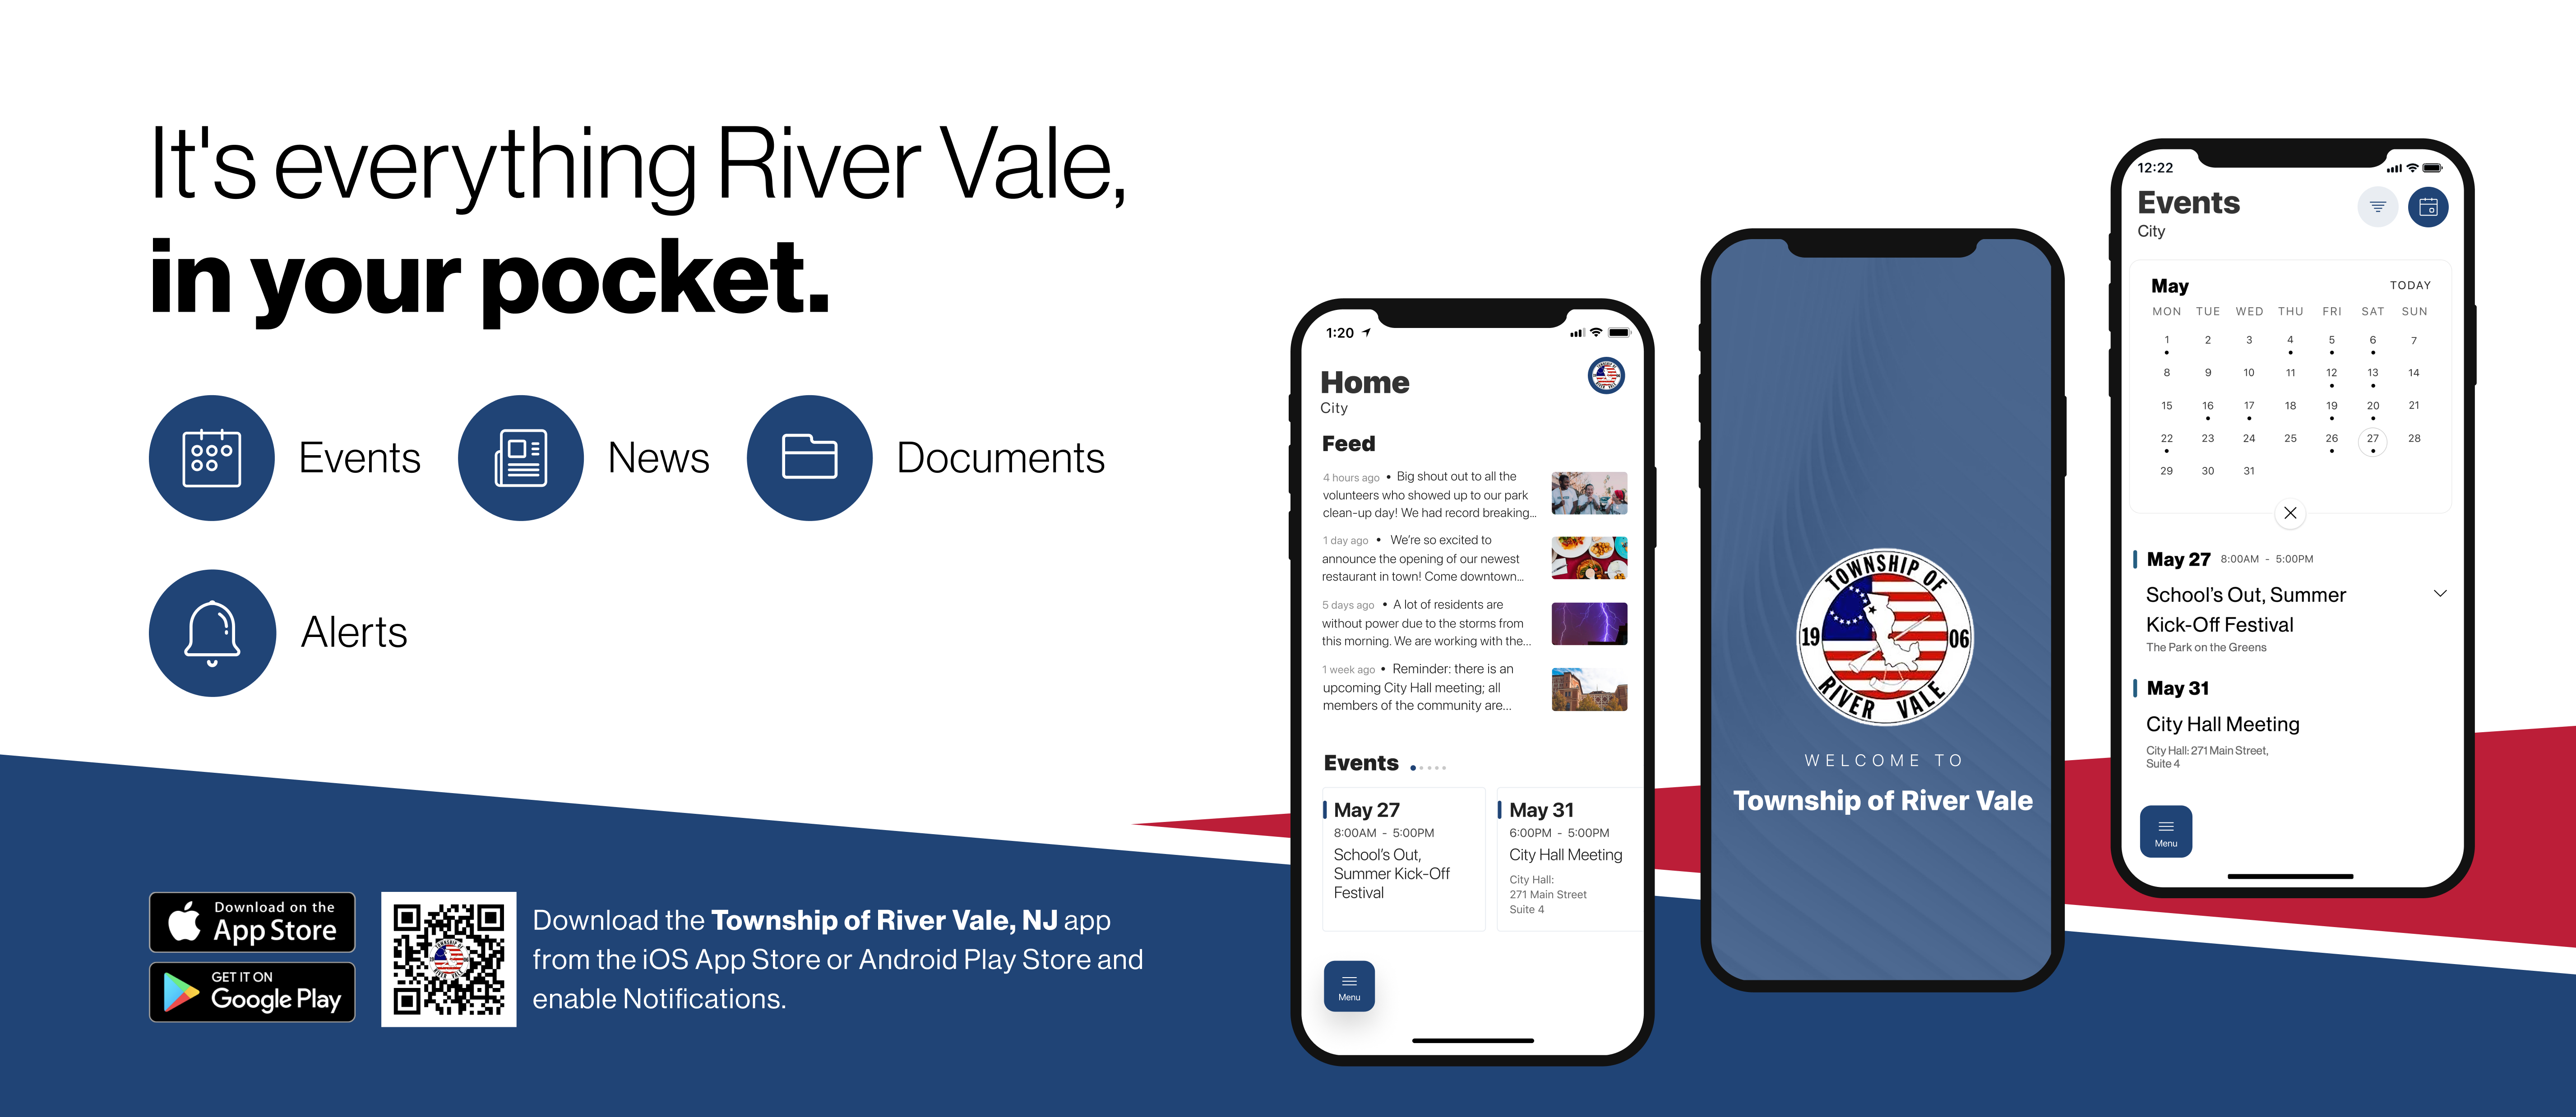 It's everything River Vale, in your pocket.